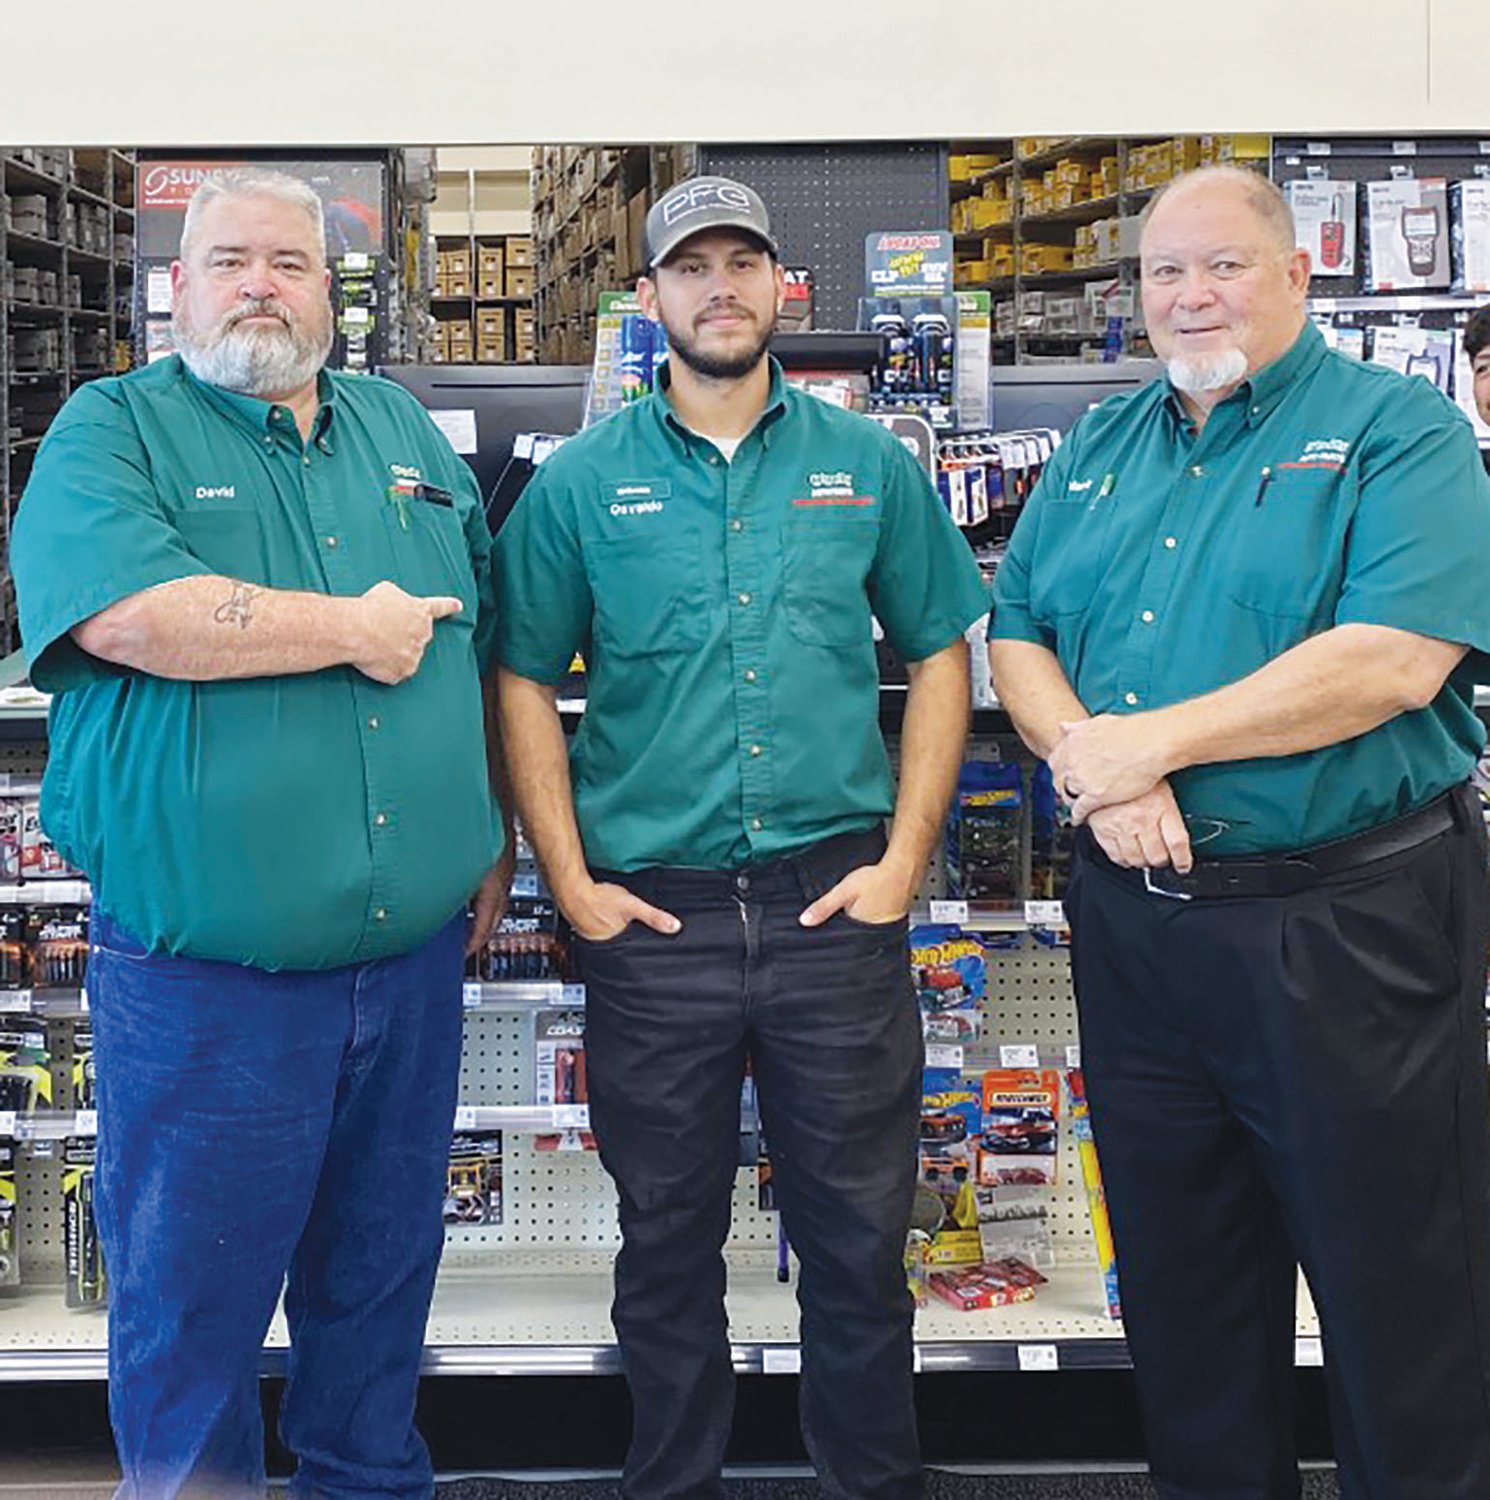 L-R: Assistant Manager David Hicks, Manager Osvaldo Perez and Assistant Manager Mark Duda at the new O'Reillly Auto Parts store in LaBelle.